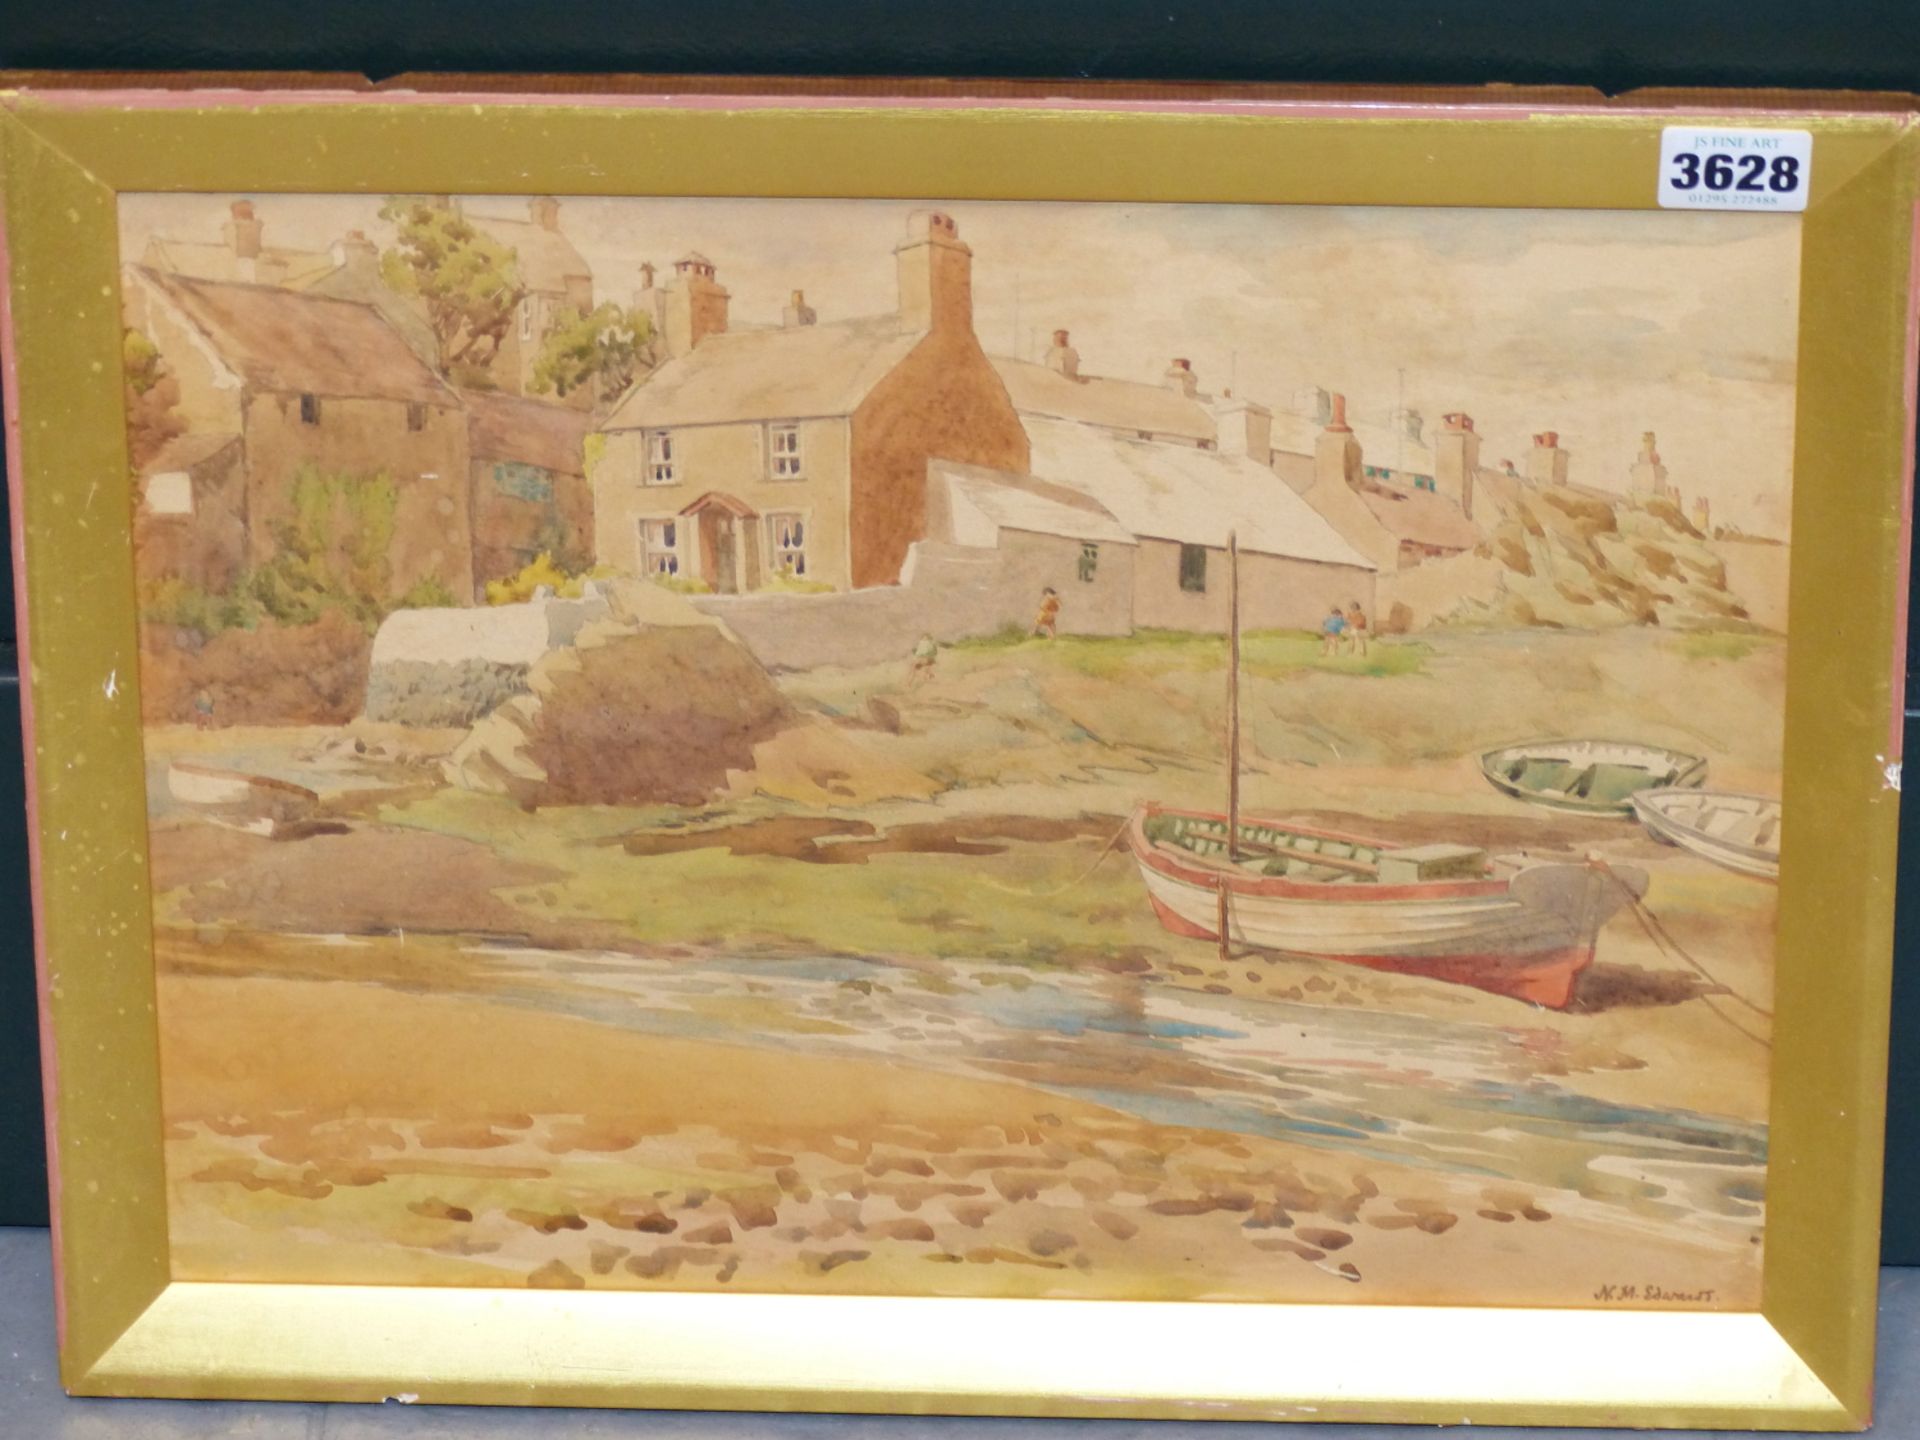 N.M.EDWARDS (EARLY 20TH CENTURY) ESTUARY AT LOW TIDE WITH COTTAGES, WATERCOLOUR 35 X 26 cm - Image 4 of 5